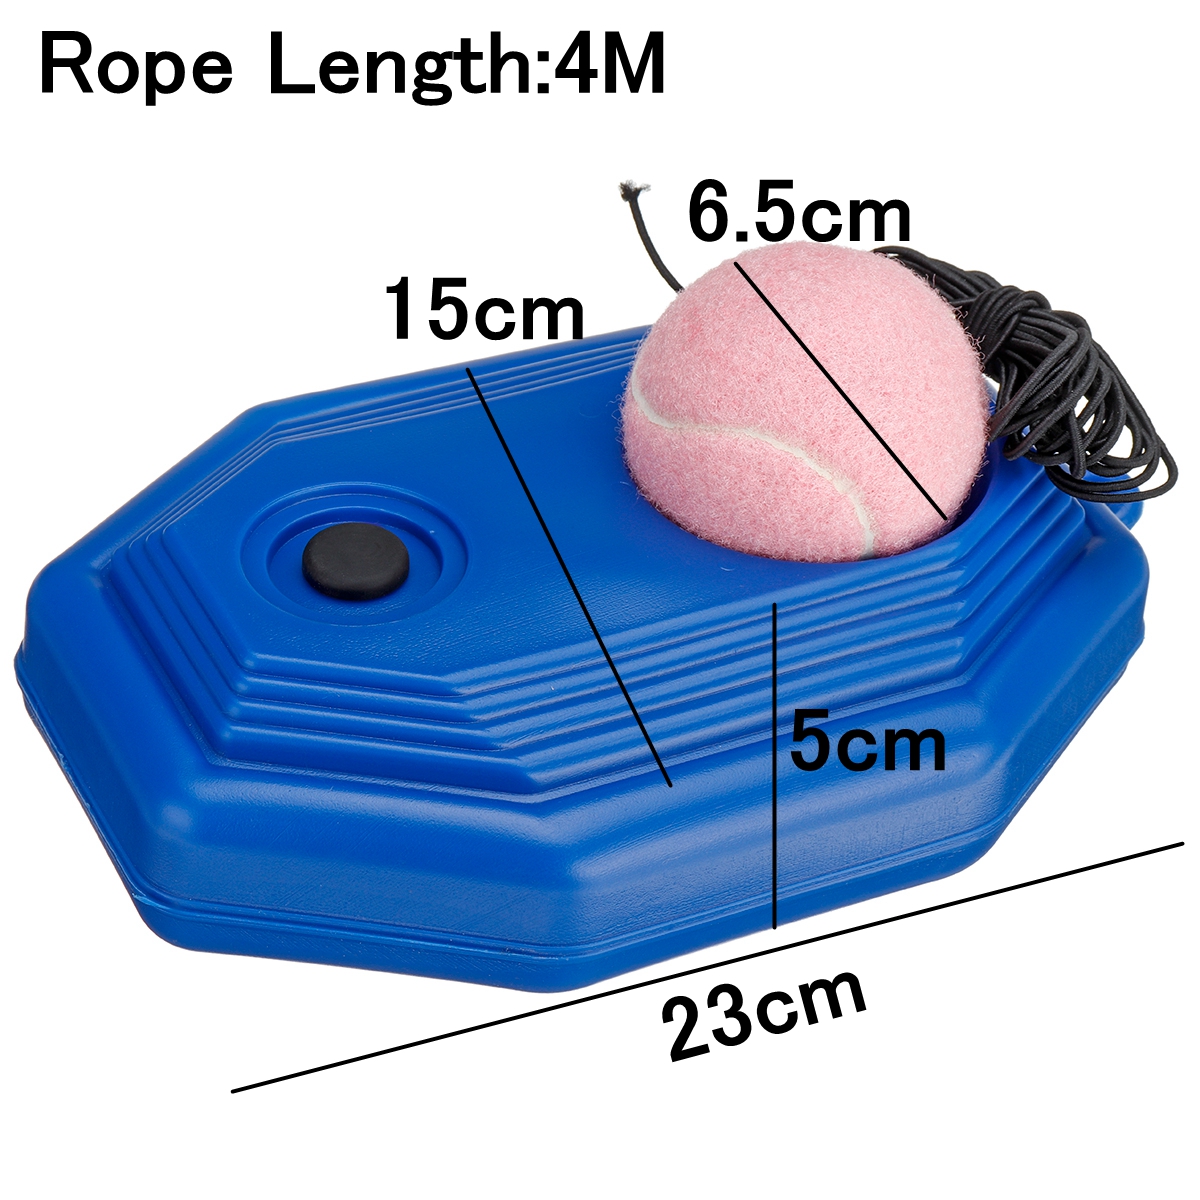 Tennis-Rebounder-Tennis-Swing-Ball-Practice-Equipment-Portable-Self-Training-Tool-with-String-1878830-2